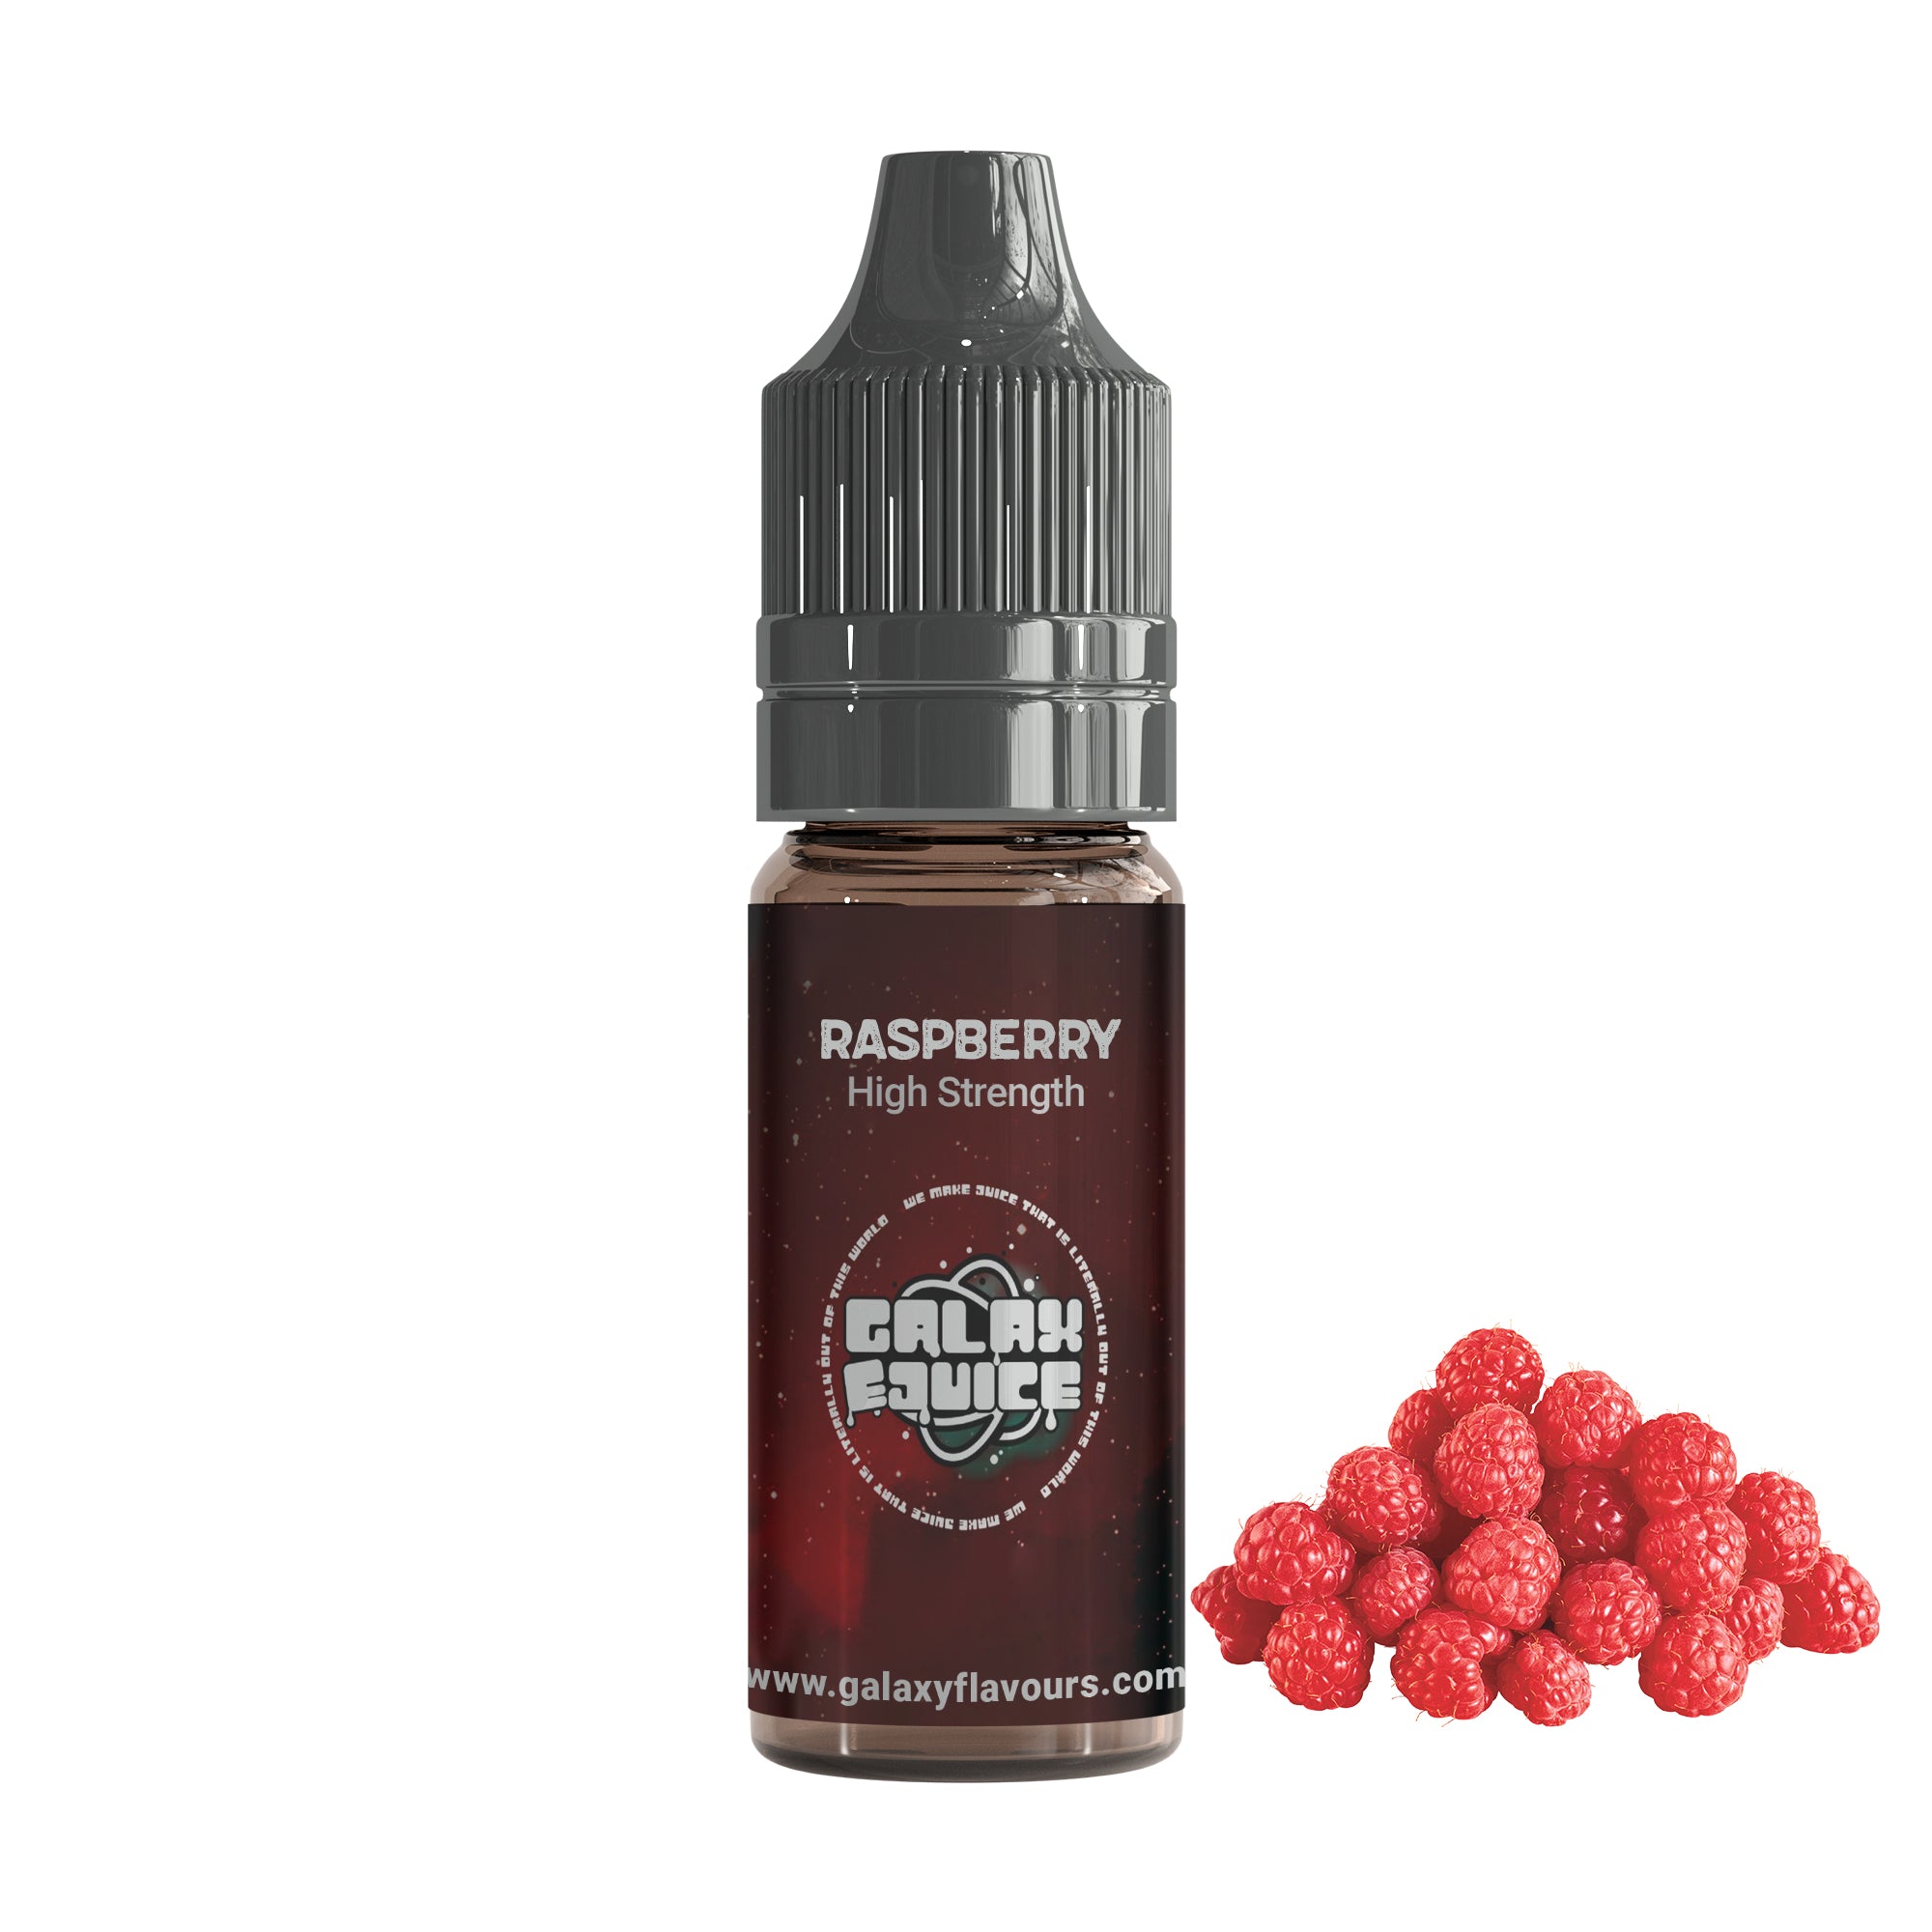 Rasperry High High Strength Professional Flavouring.